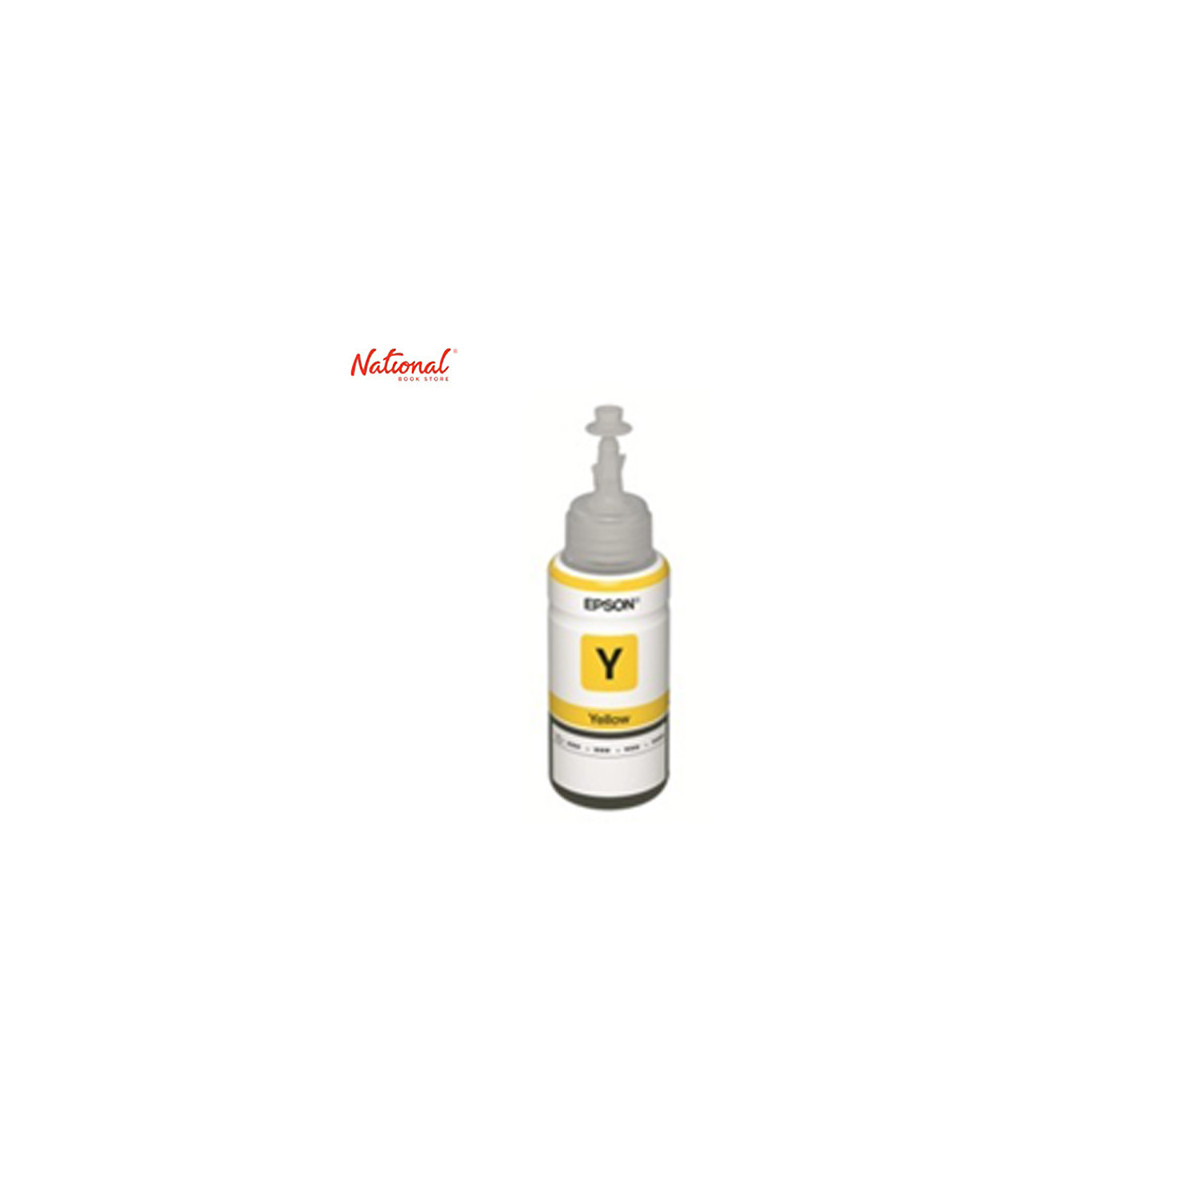 Epson Ink Bottle Refill T664400 Yellow For L100/L200 Printer